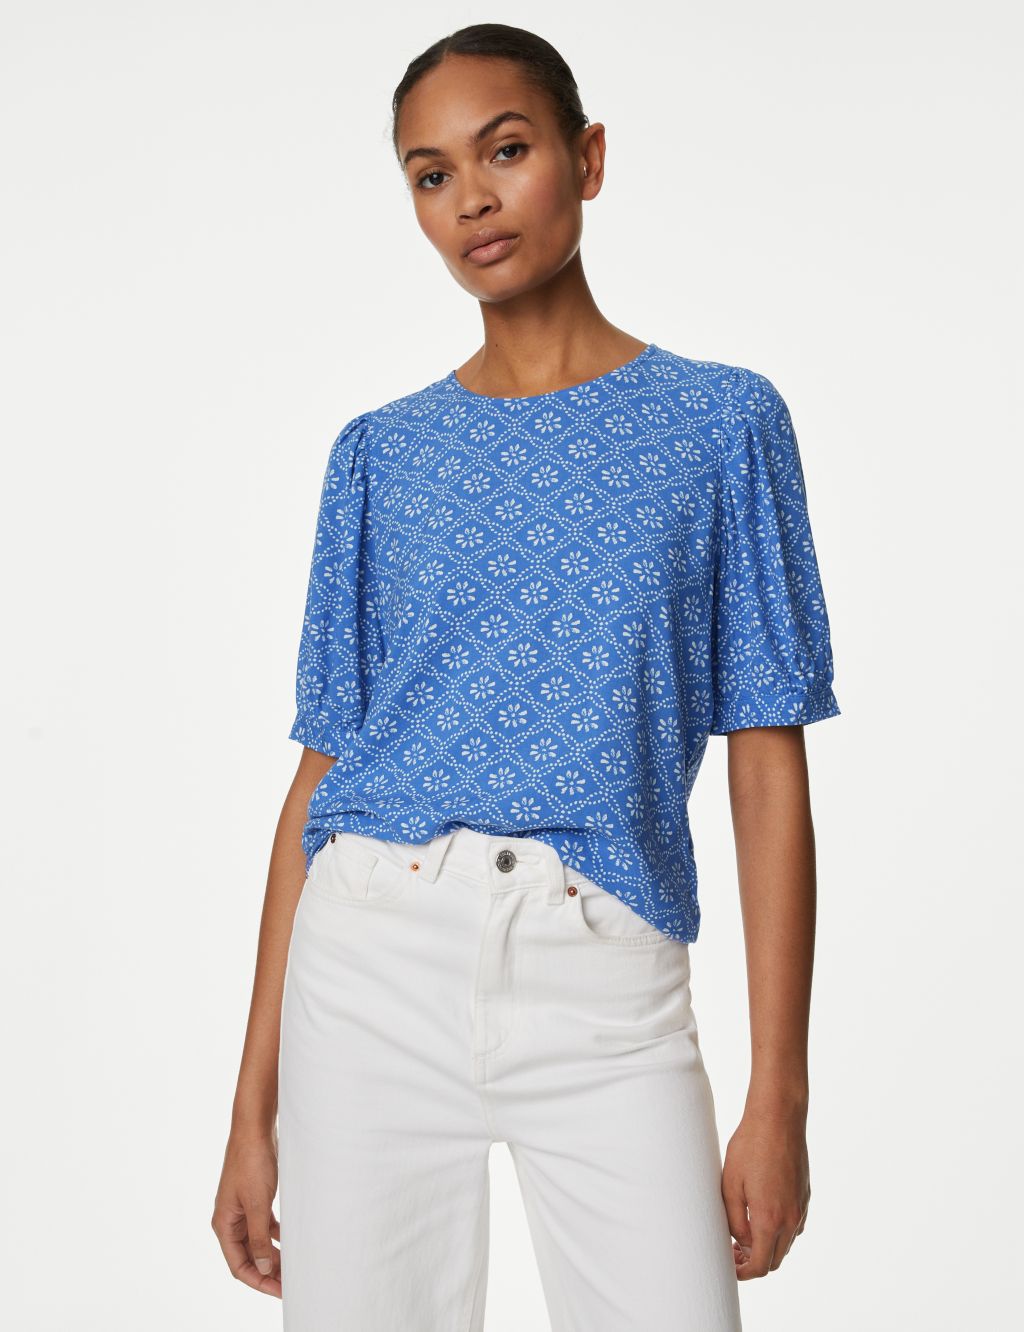 Printed Puff Sleeve Blouse image 1